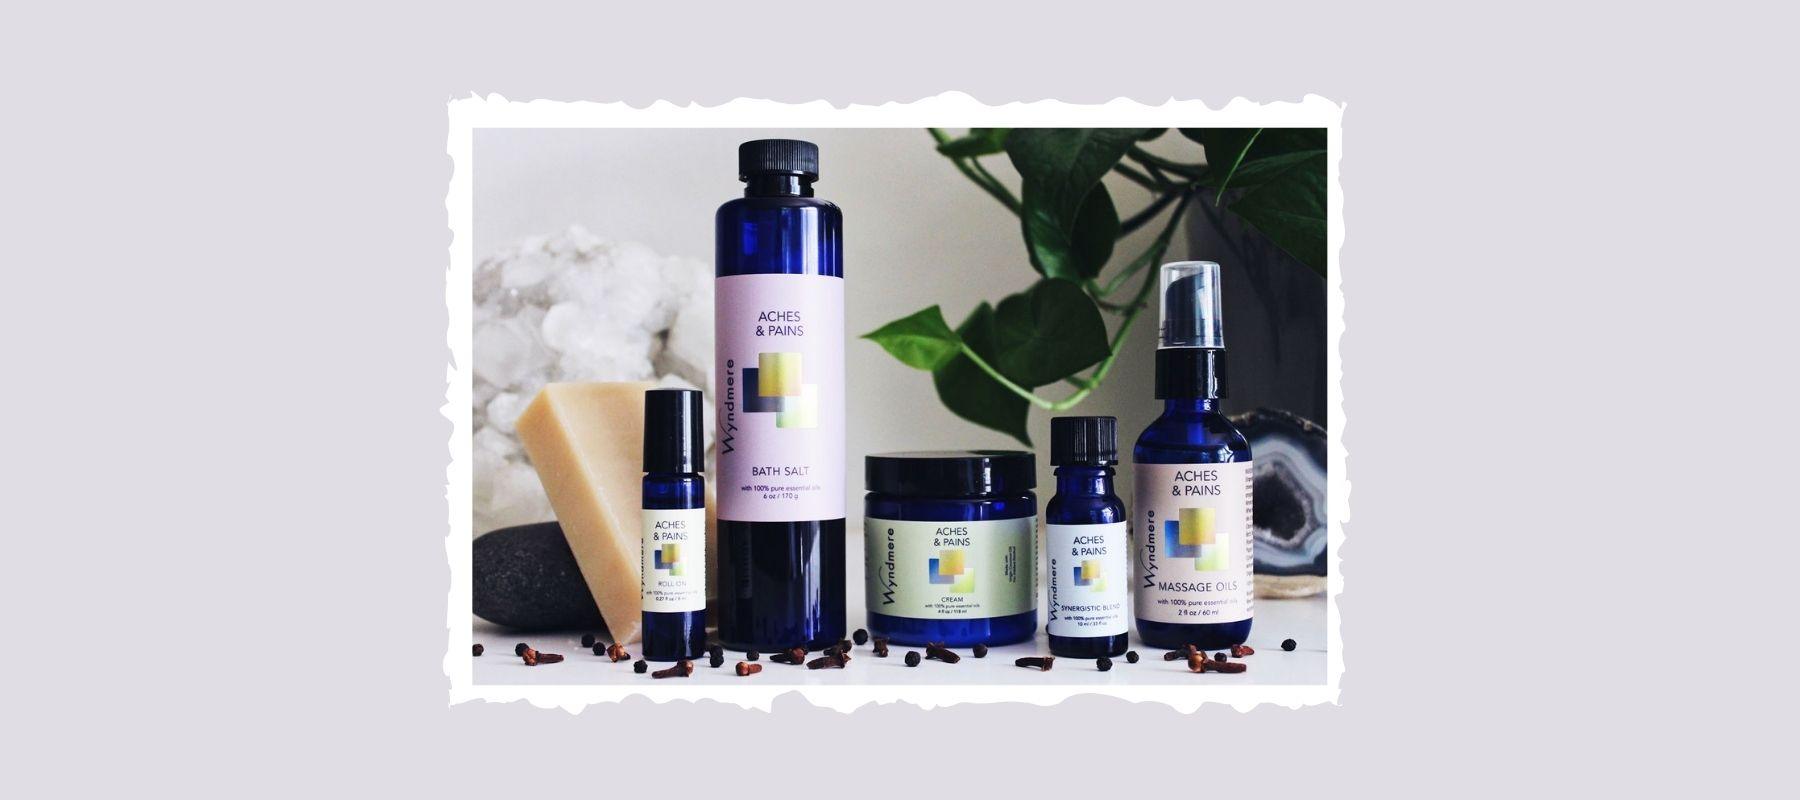 Wyndmere products containing Aches & Pains blend